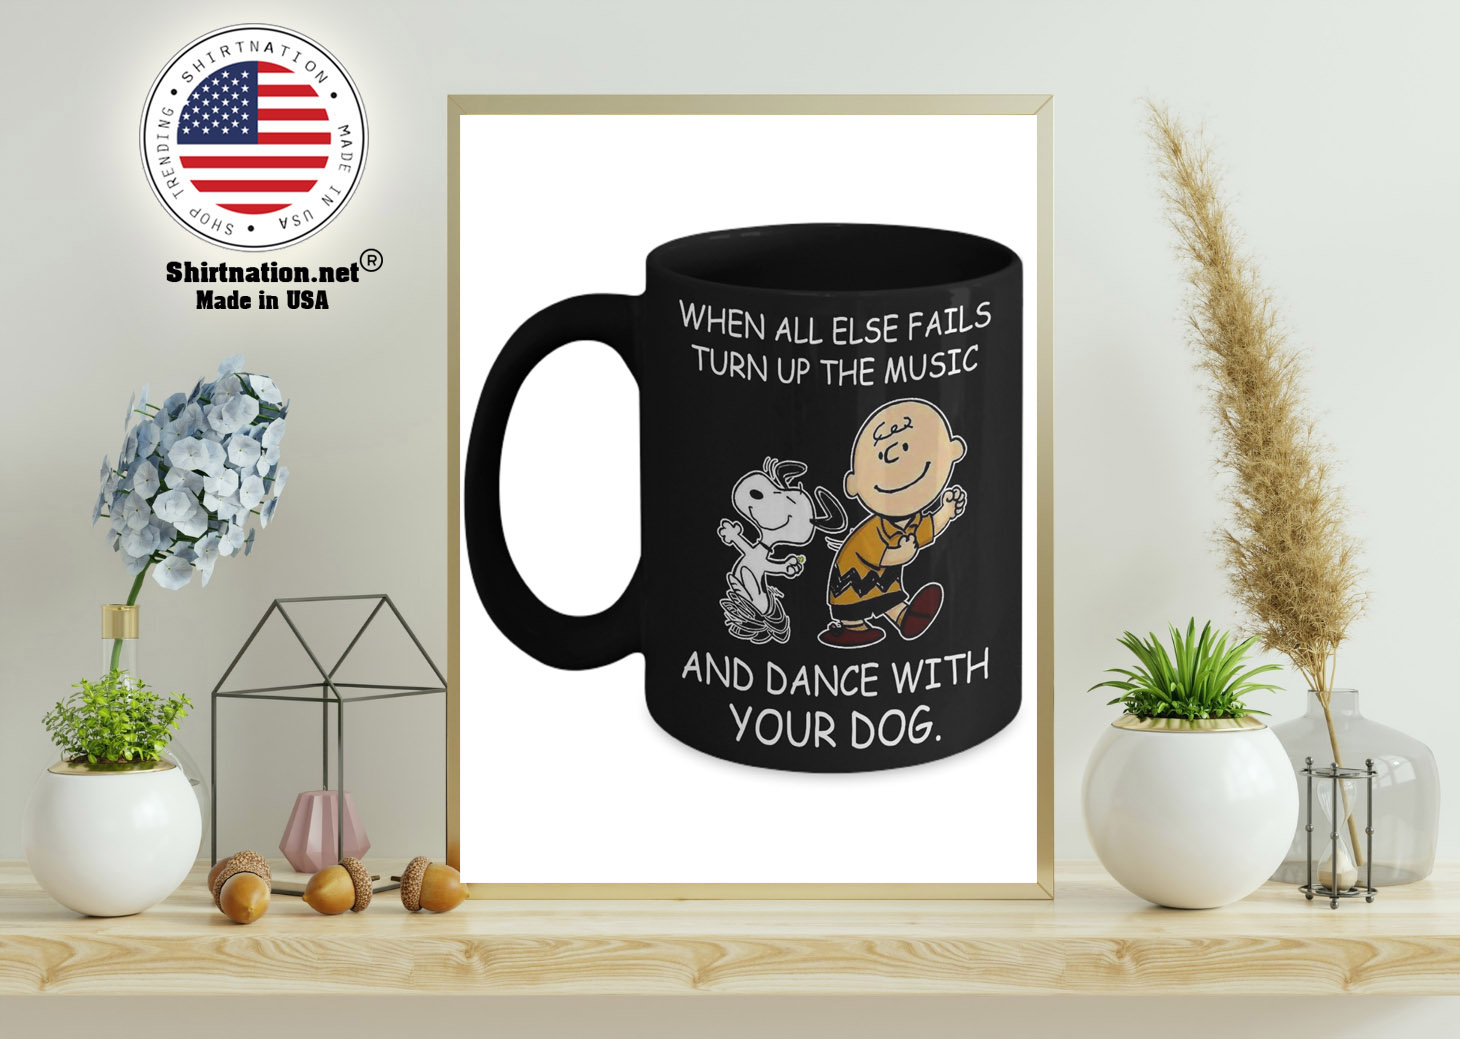 Peanut Snoopy When all else fails turn up the music and dance with your dog mug 15